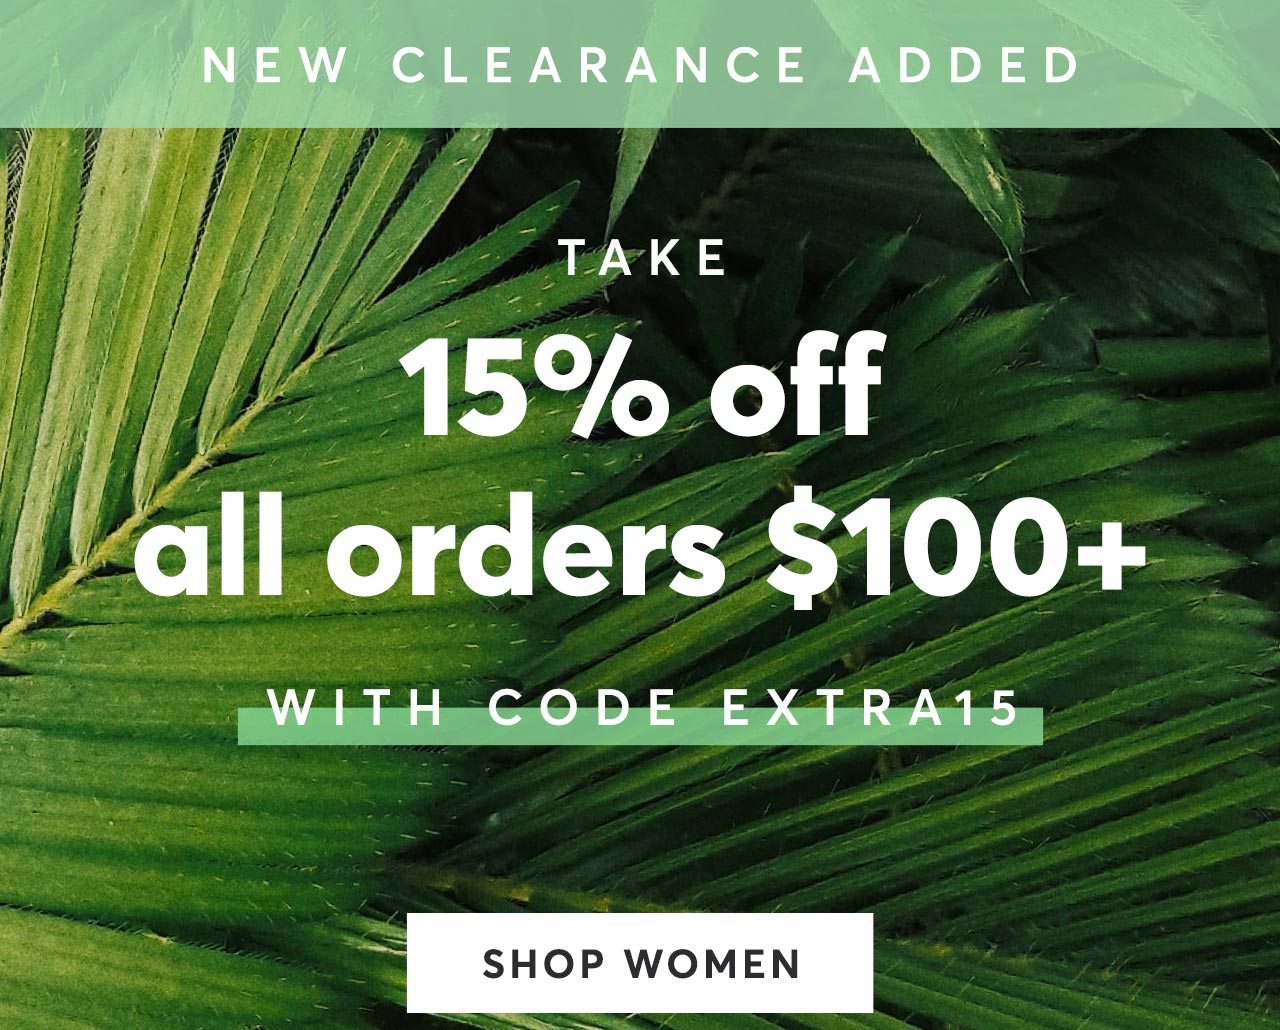 New Clearance Added! Take 15% off all orders $100+ with code EXTRA15. Shop Women